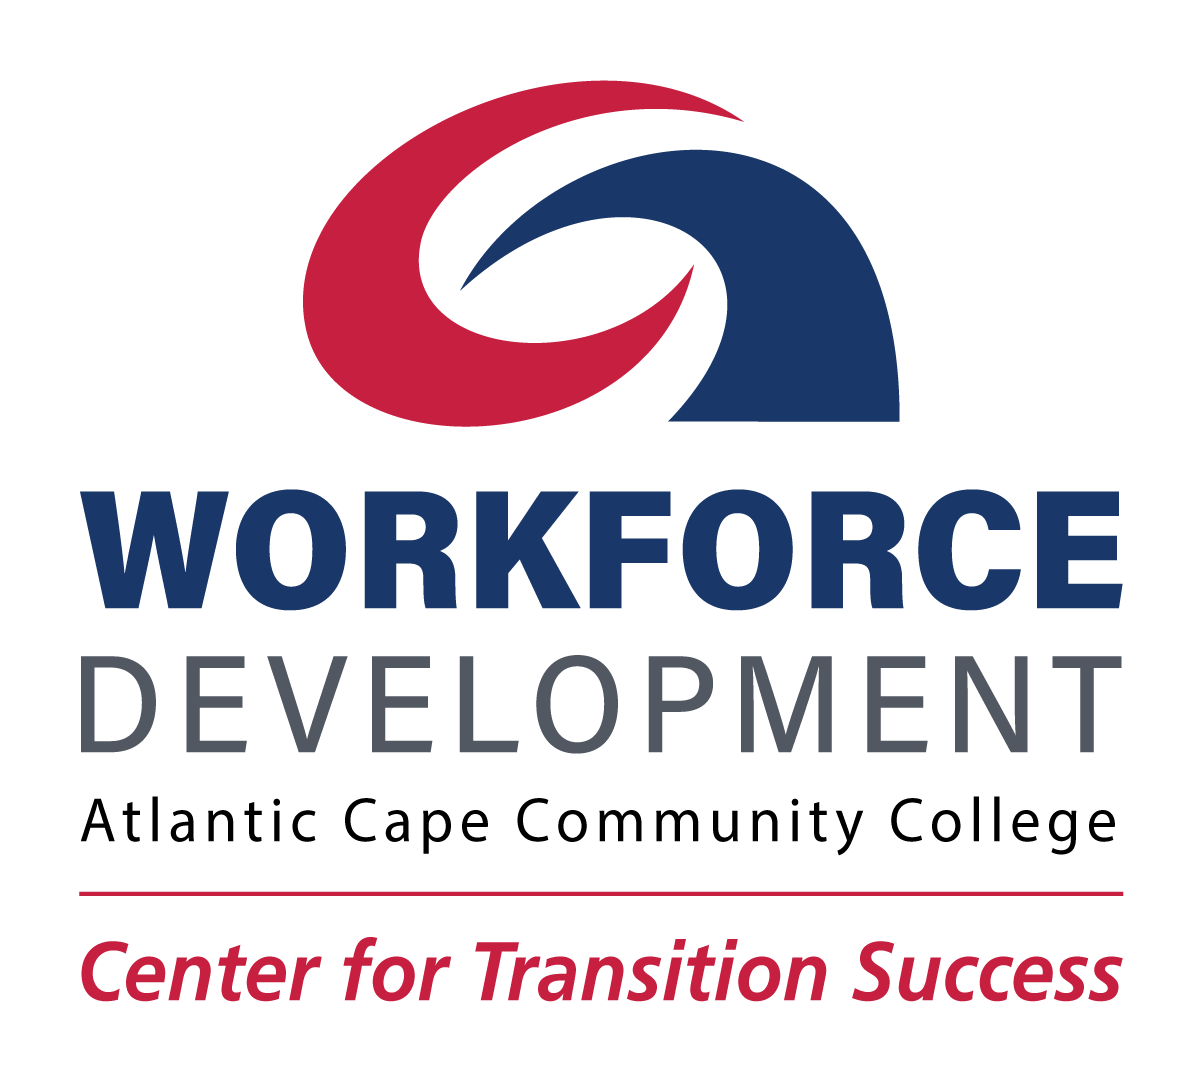 center-for-transition-success-logo-stacked.png